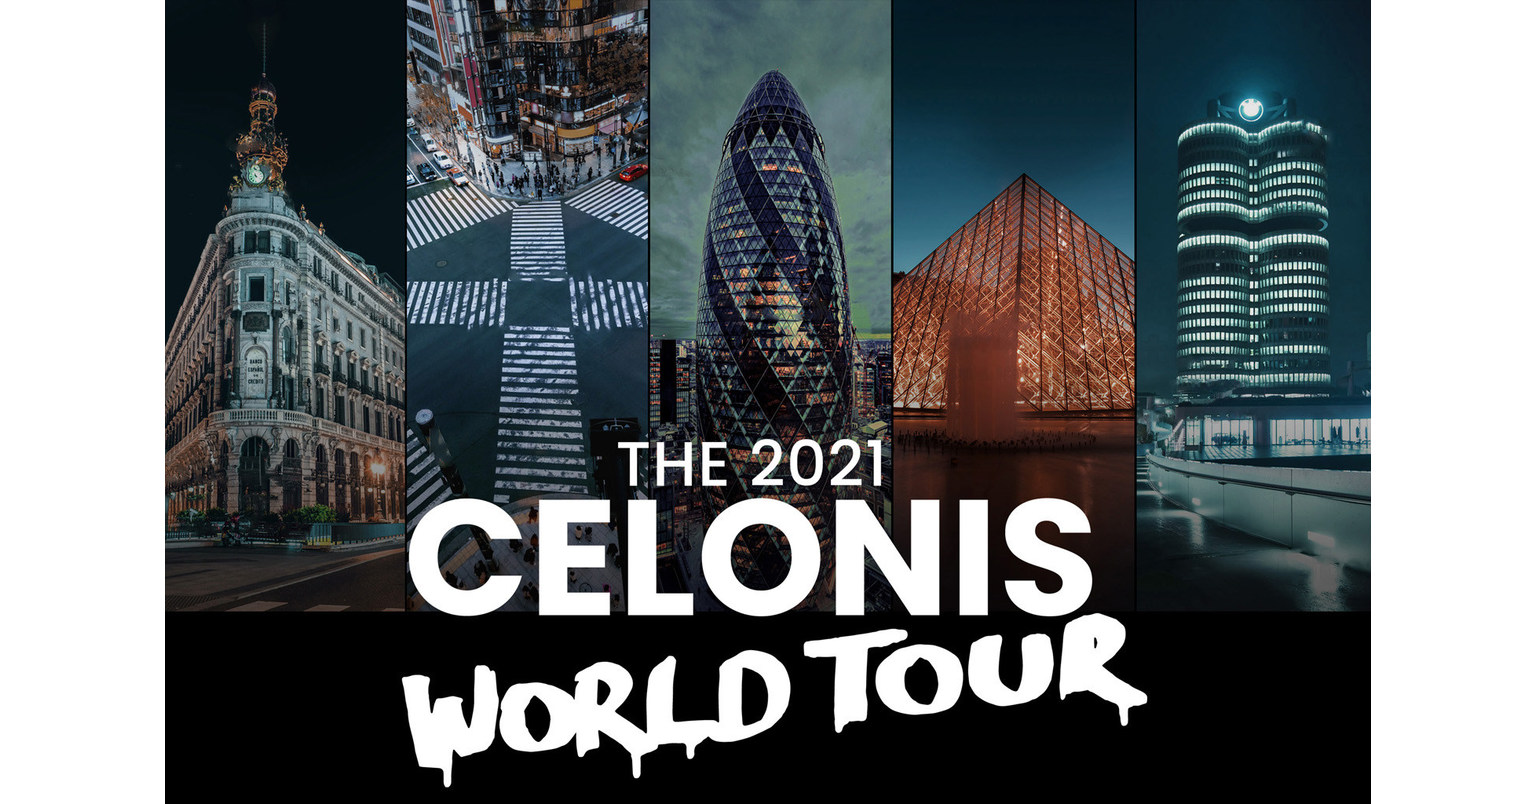 Celonis Announces World Tour 2021 Headliners Join 15,000 Business